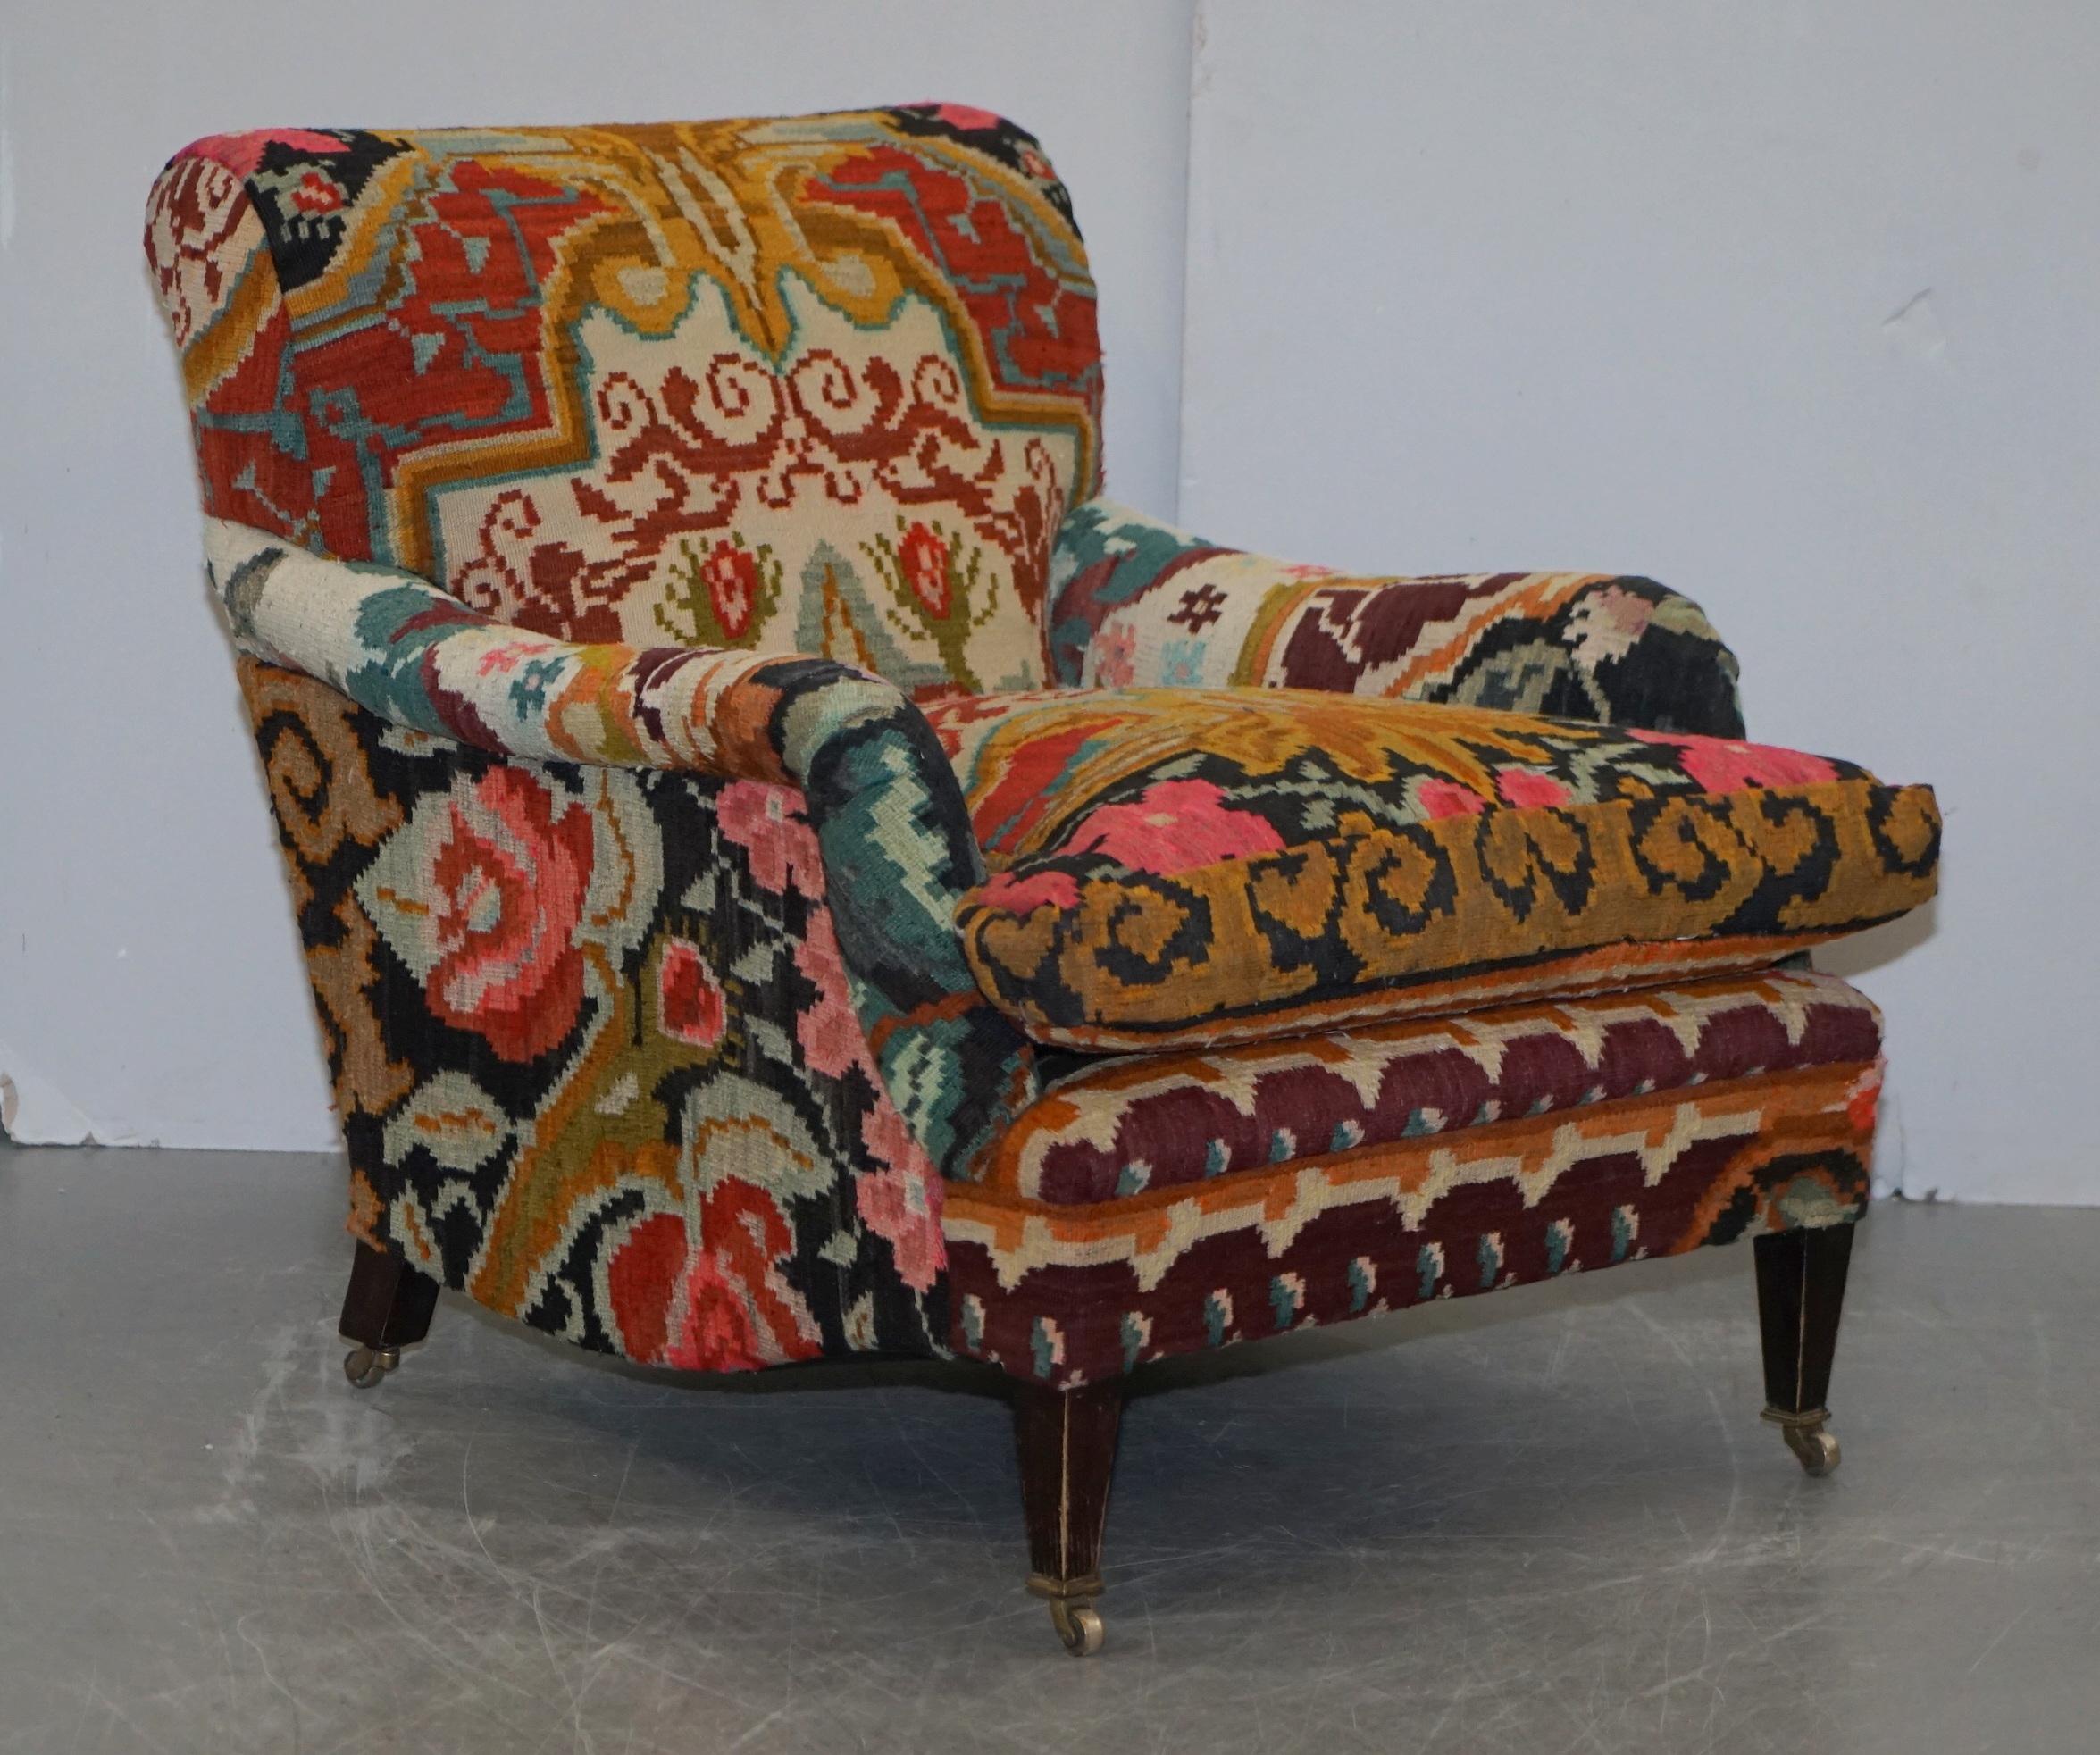 We are delighted to offer for sale this sublime and highly collectable pair of George Smith Signature Scroll Arm Aztec Kilim armchairs with oversized feather filled cushions 

These are just about the finest armchairs available to buy today